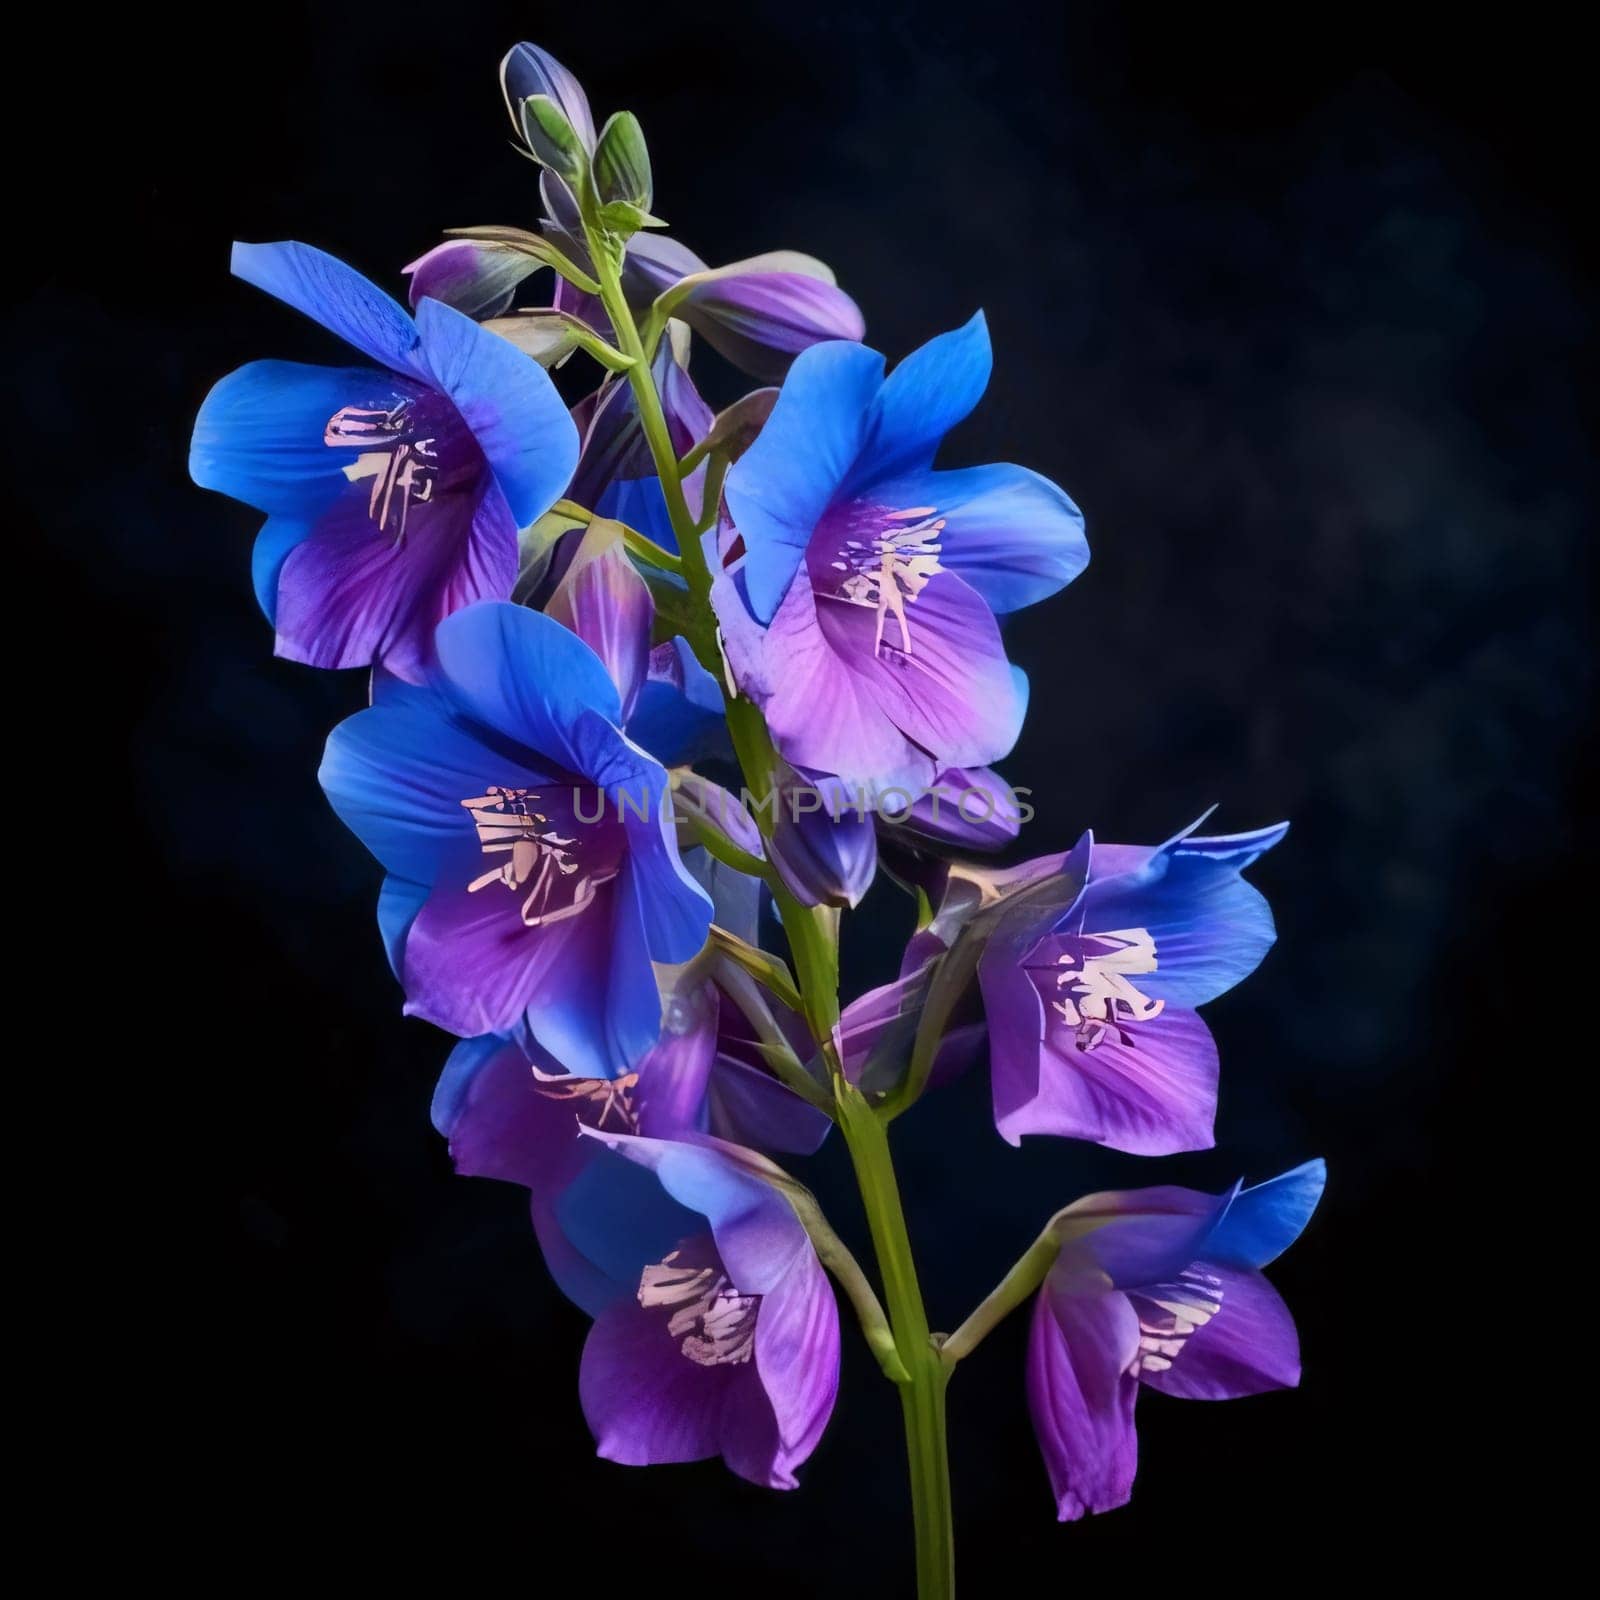 Purple orchid on black background. Flowering flowers, a symbol of spring, new life. A joyful time of nature waking up to life.